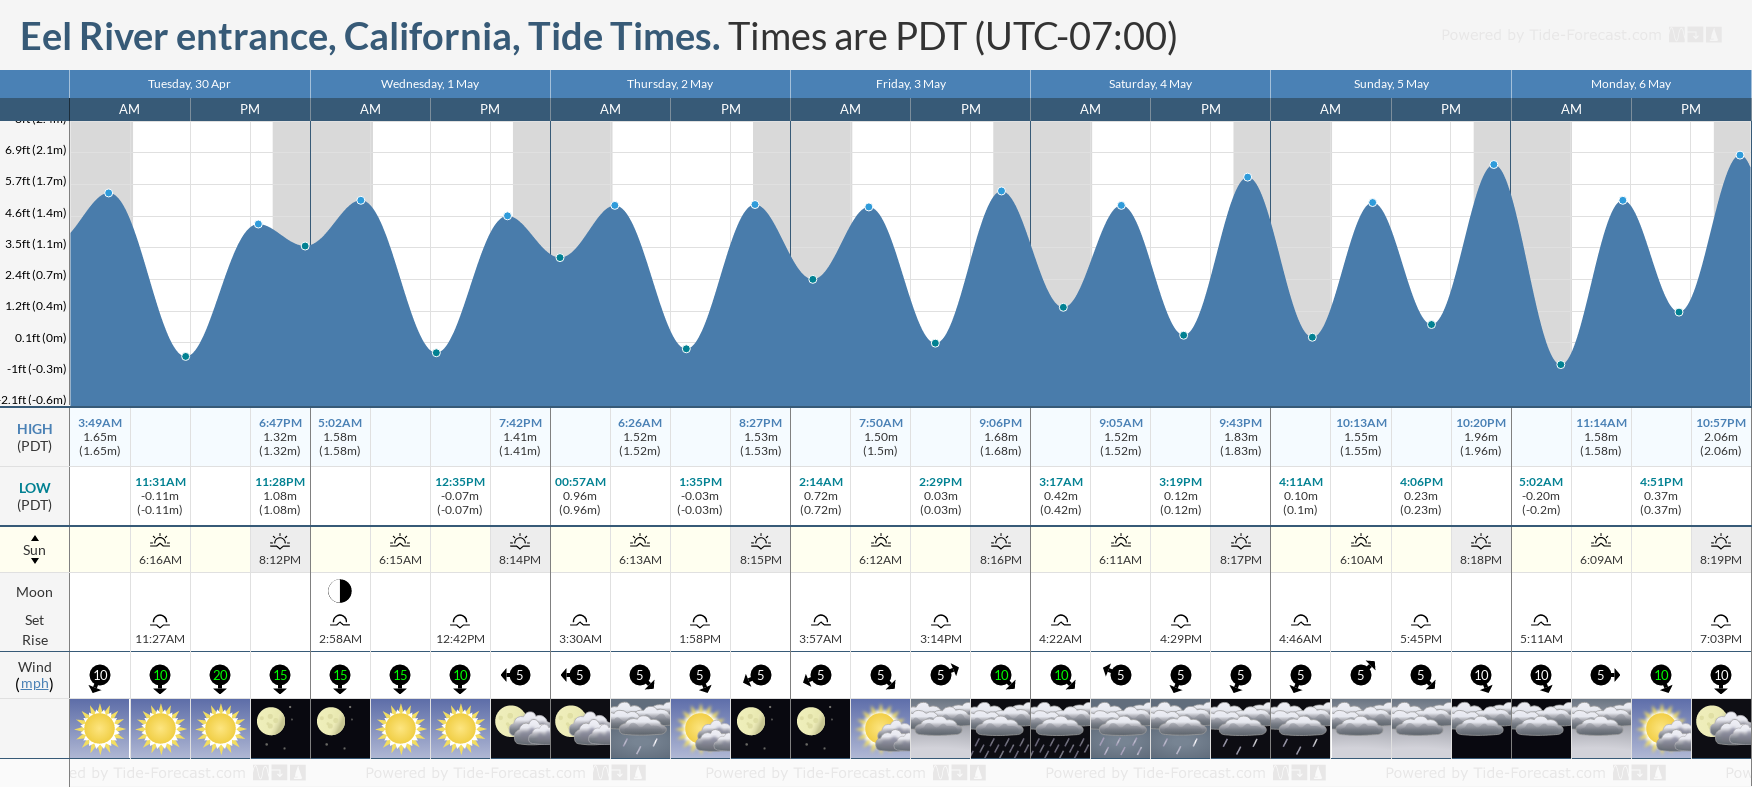 Eel River entrance, California Tide Chart including high and low tide tide times for the next 7 days